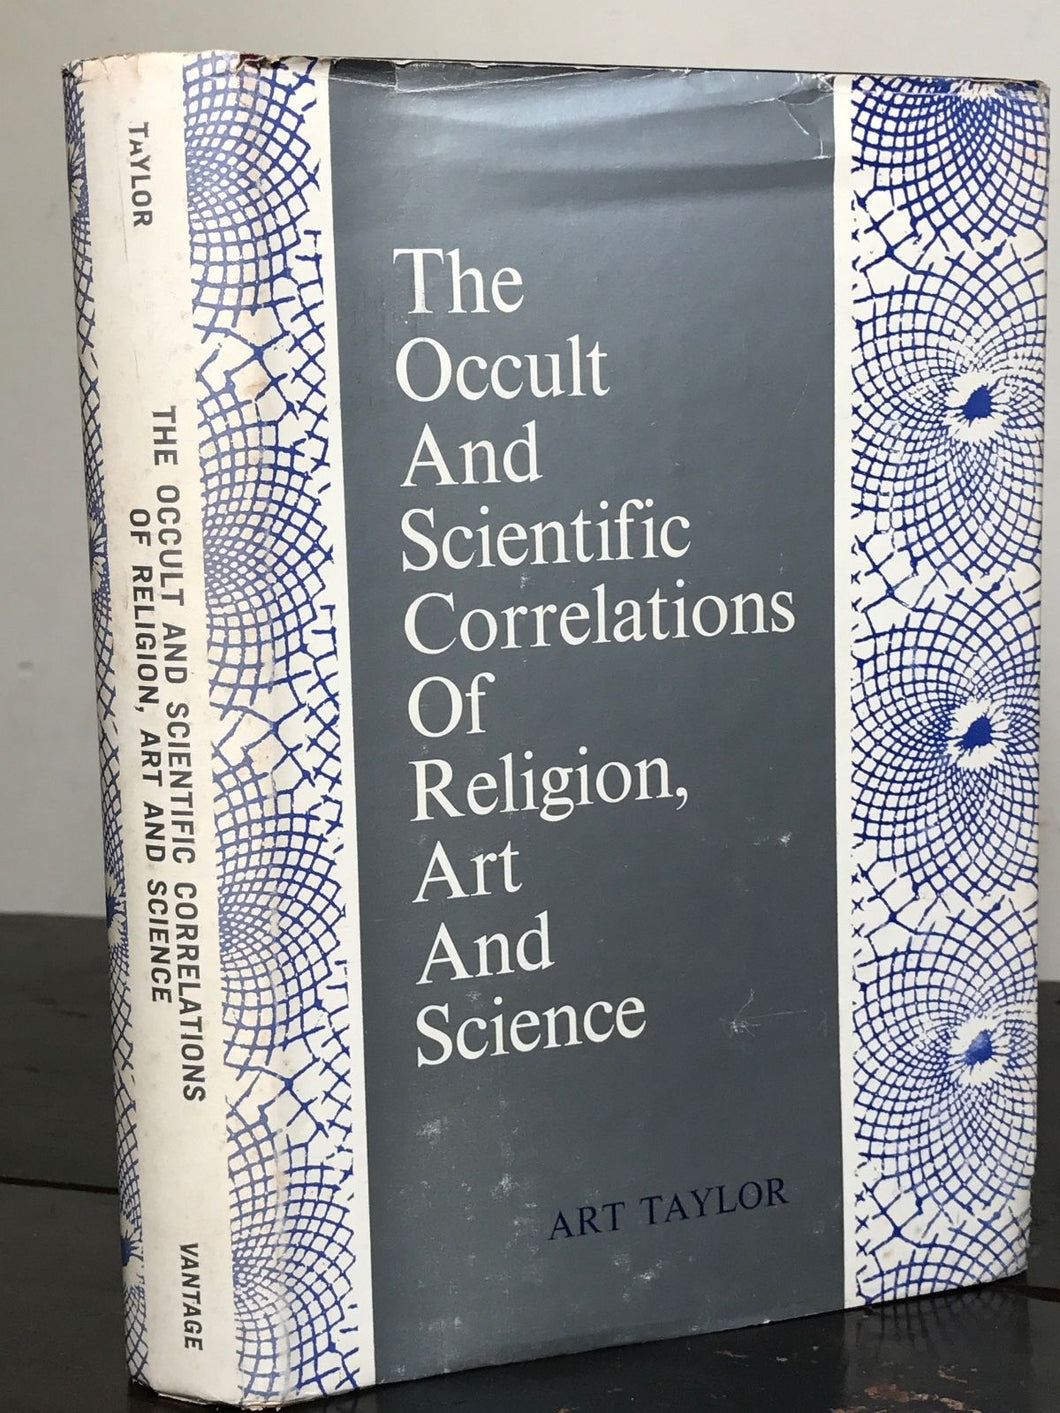 THE OCCULT AND SCIENTIFIC CORRELATIONS OF RELIGION AND ART, Taylor, 1st/1st 1968